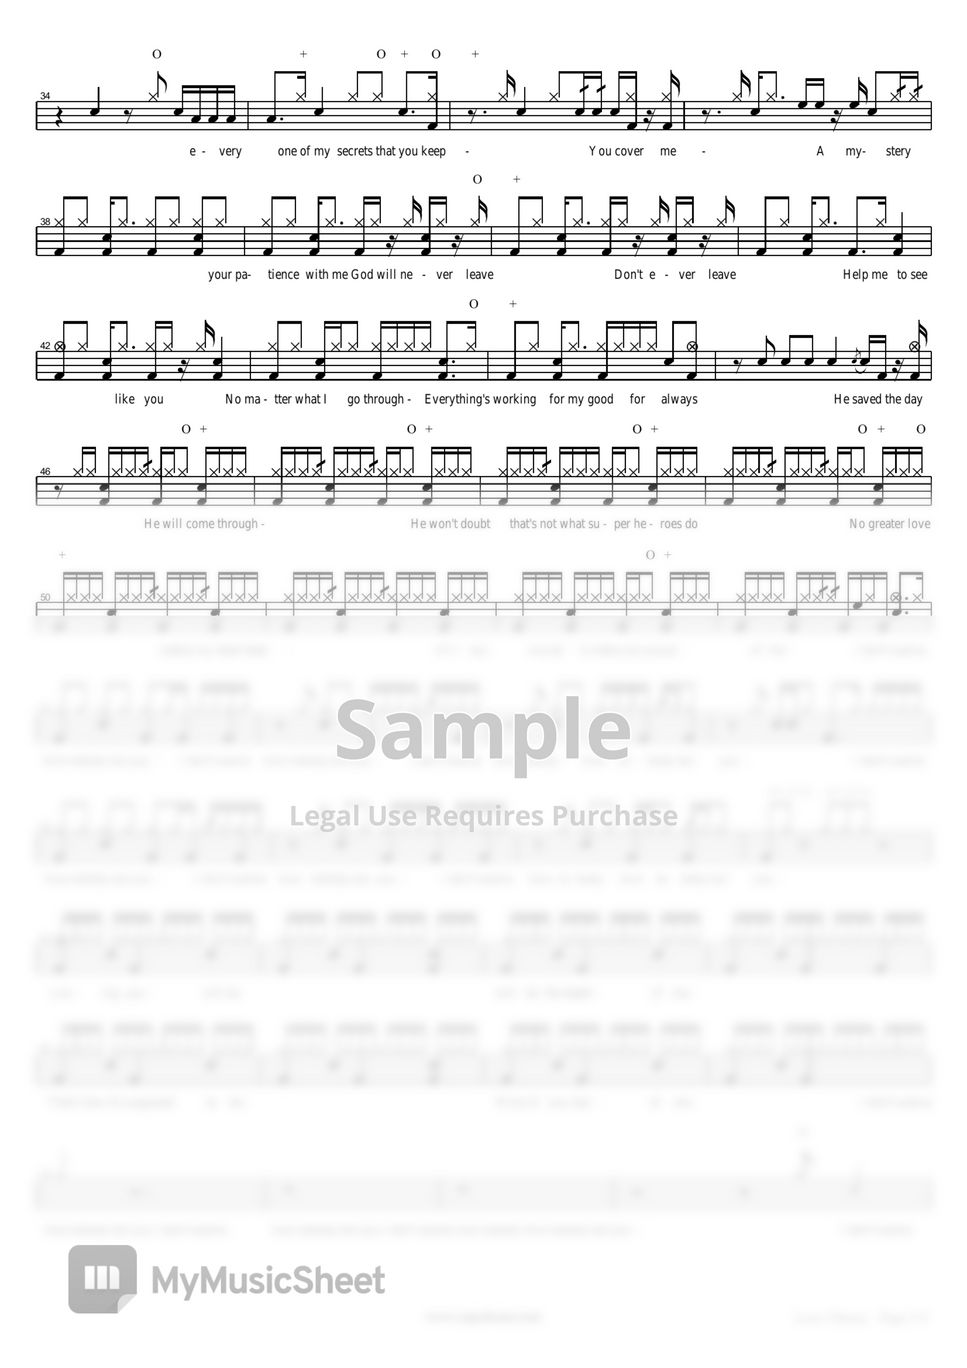 Kirk Franklin - Love Theory Sheets by COPYDRUM